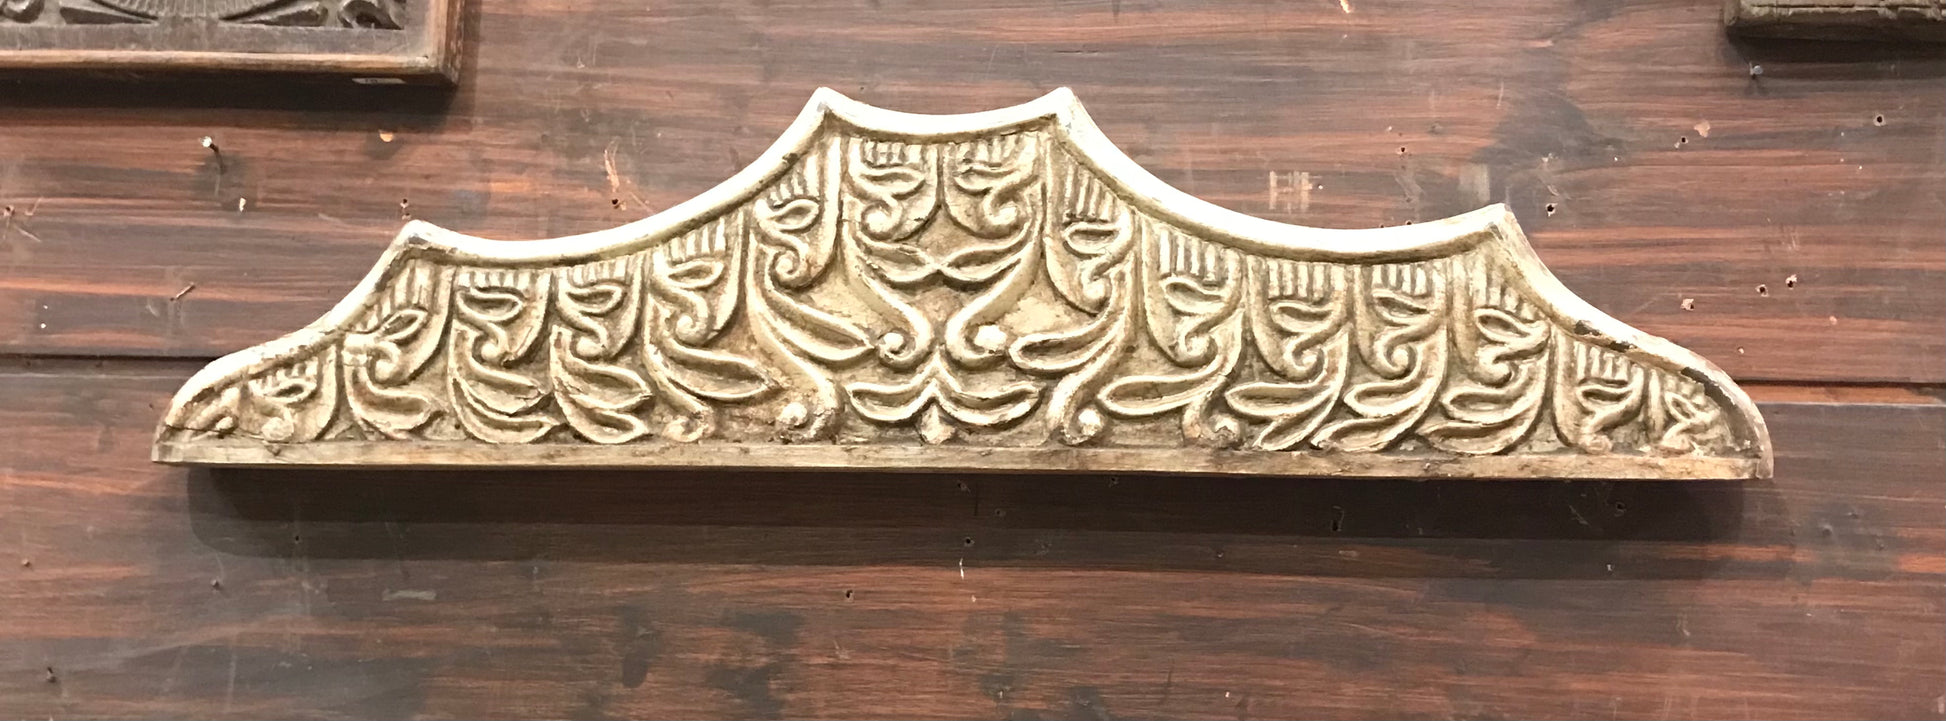 Image of Elegant and Traditional White Carved Wall Panel.  The Source India is an Indian Handicraft, Home Decor, Furnishing and Textiles Store. Based out of Hauz Khas Village New Delhi, each piece is carefully procured to allow the enhancement of India's Culture.